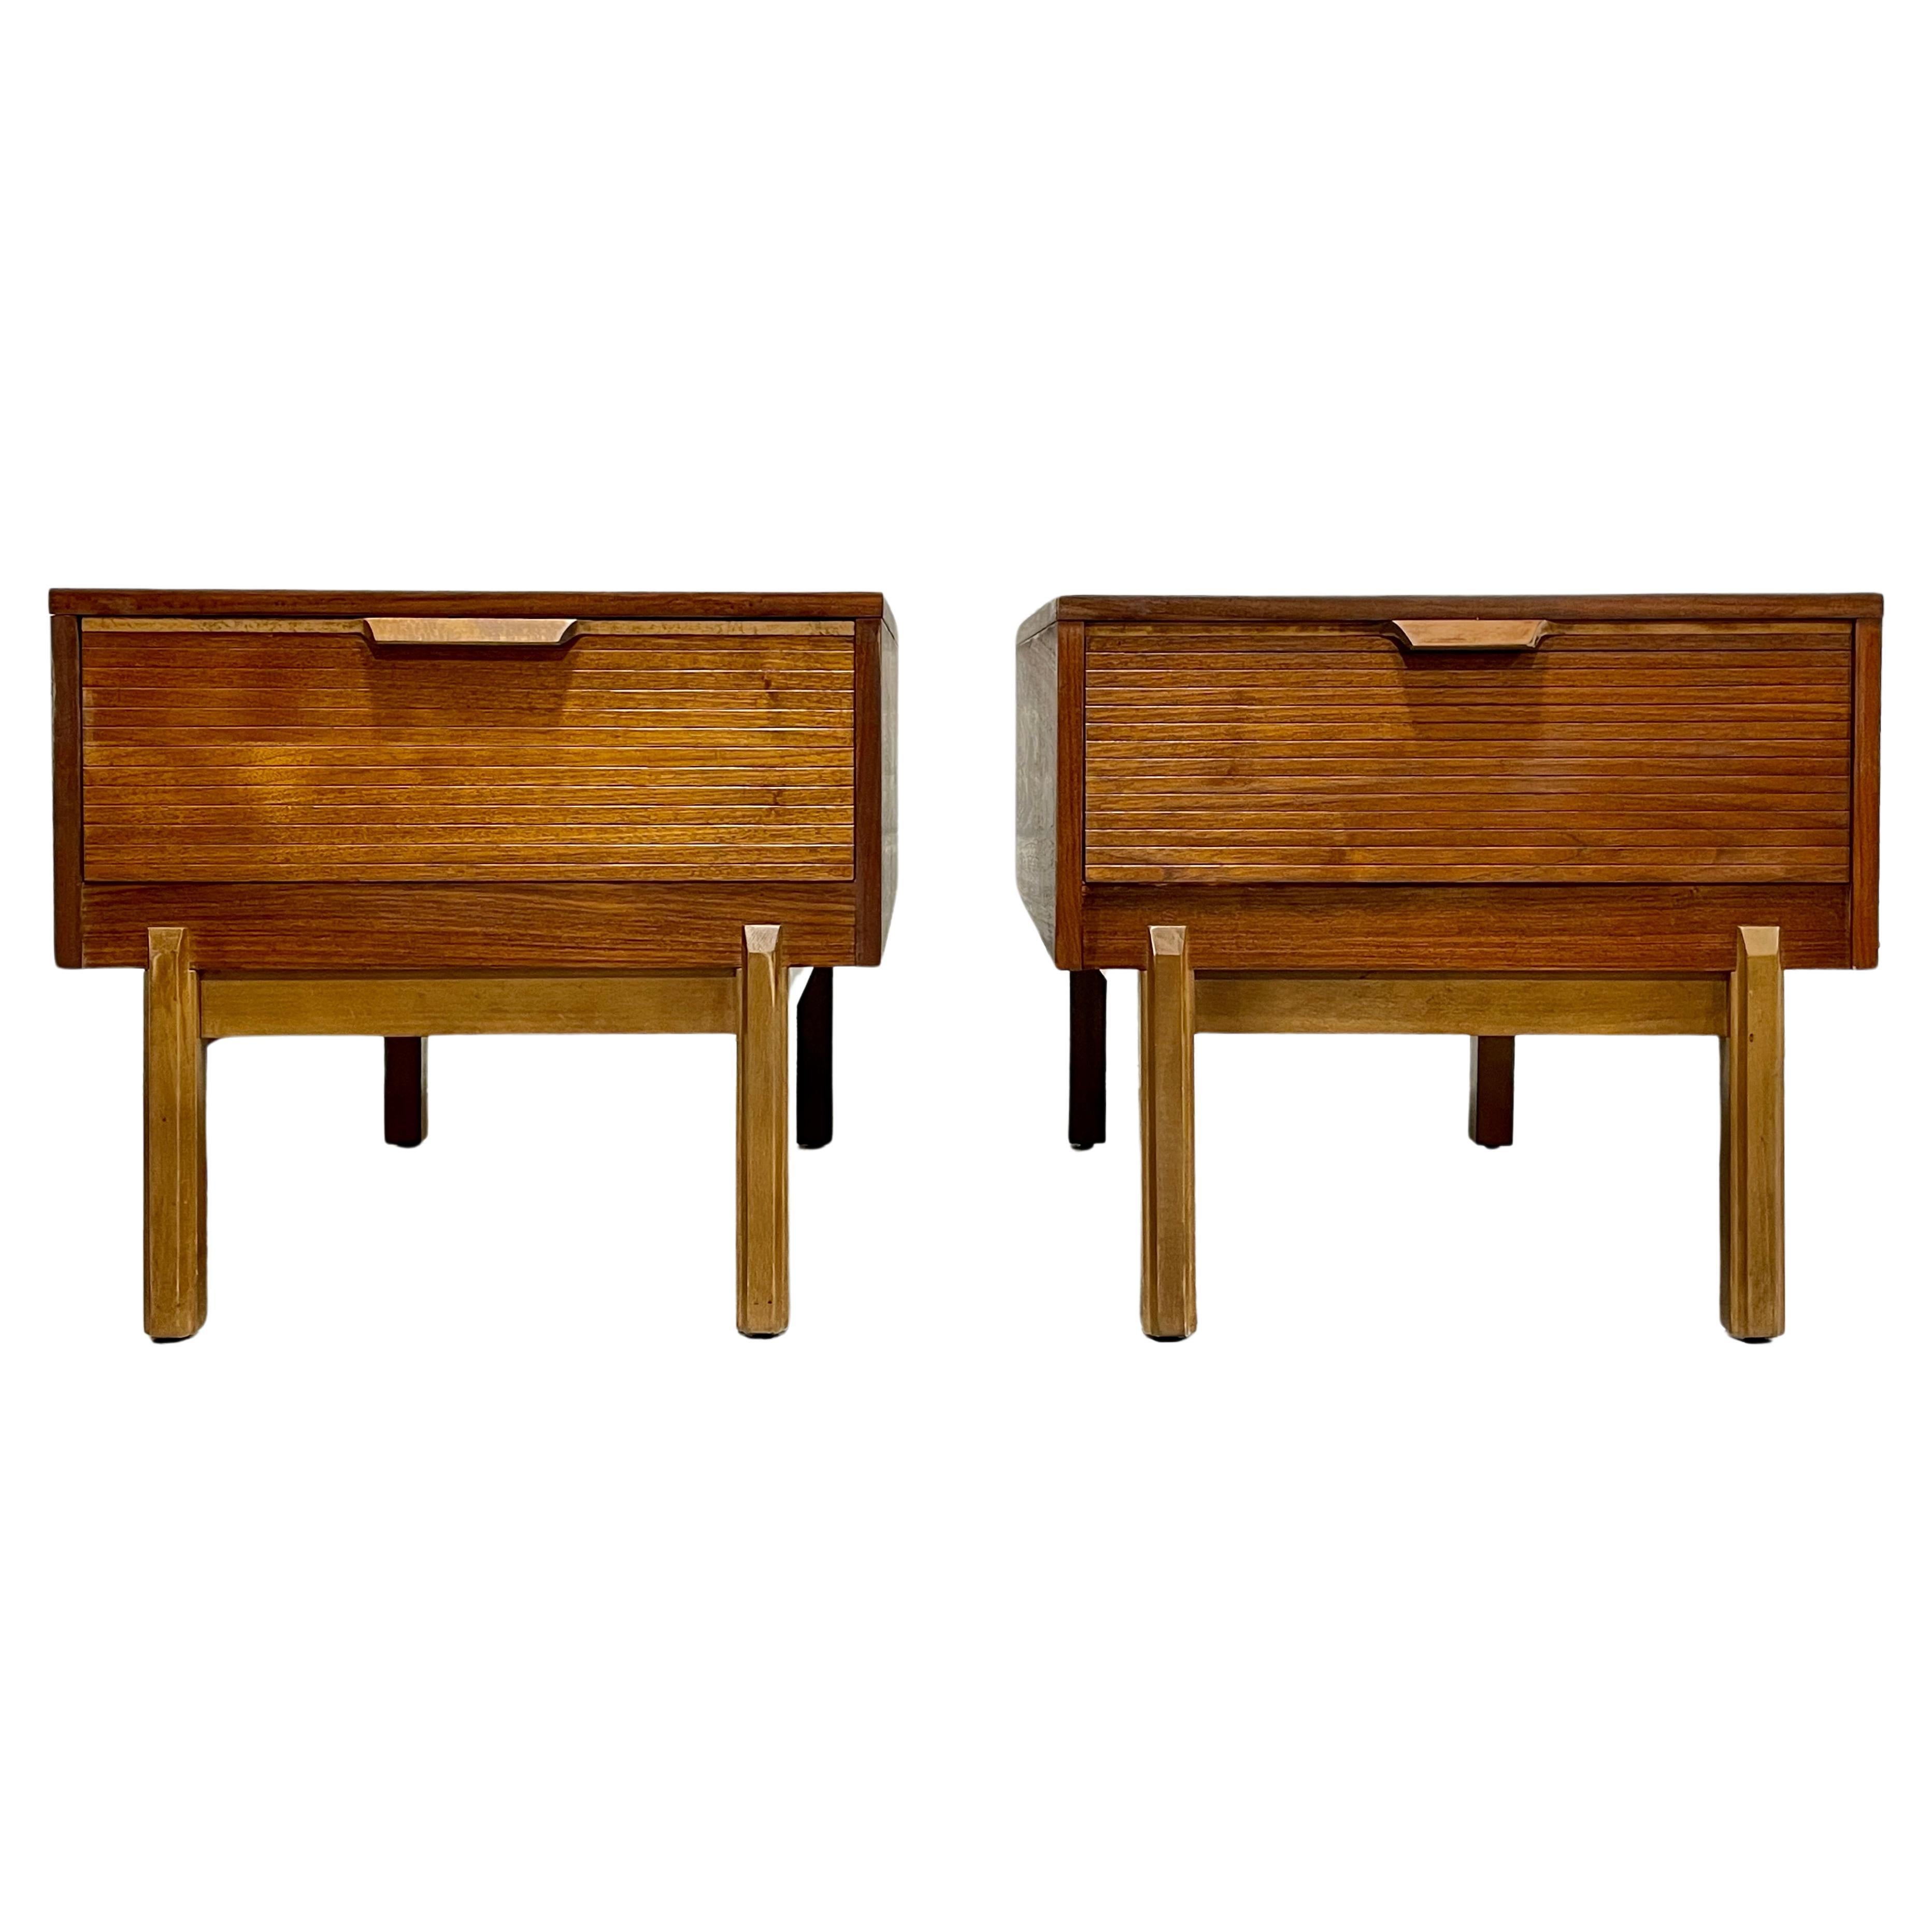 Mid Century Modern WALNUT END TABLES / Side Tables / Nightstands